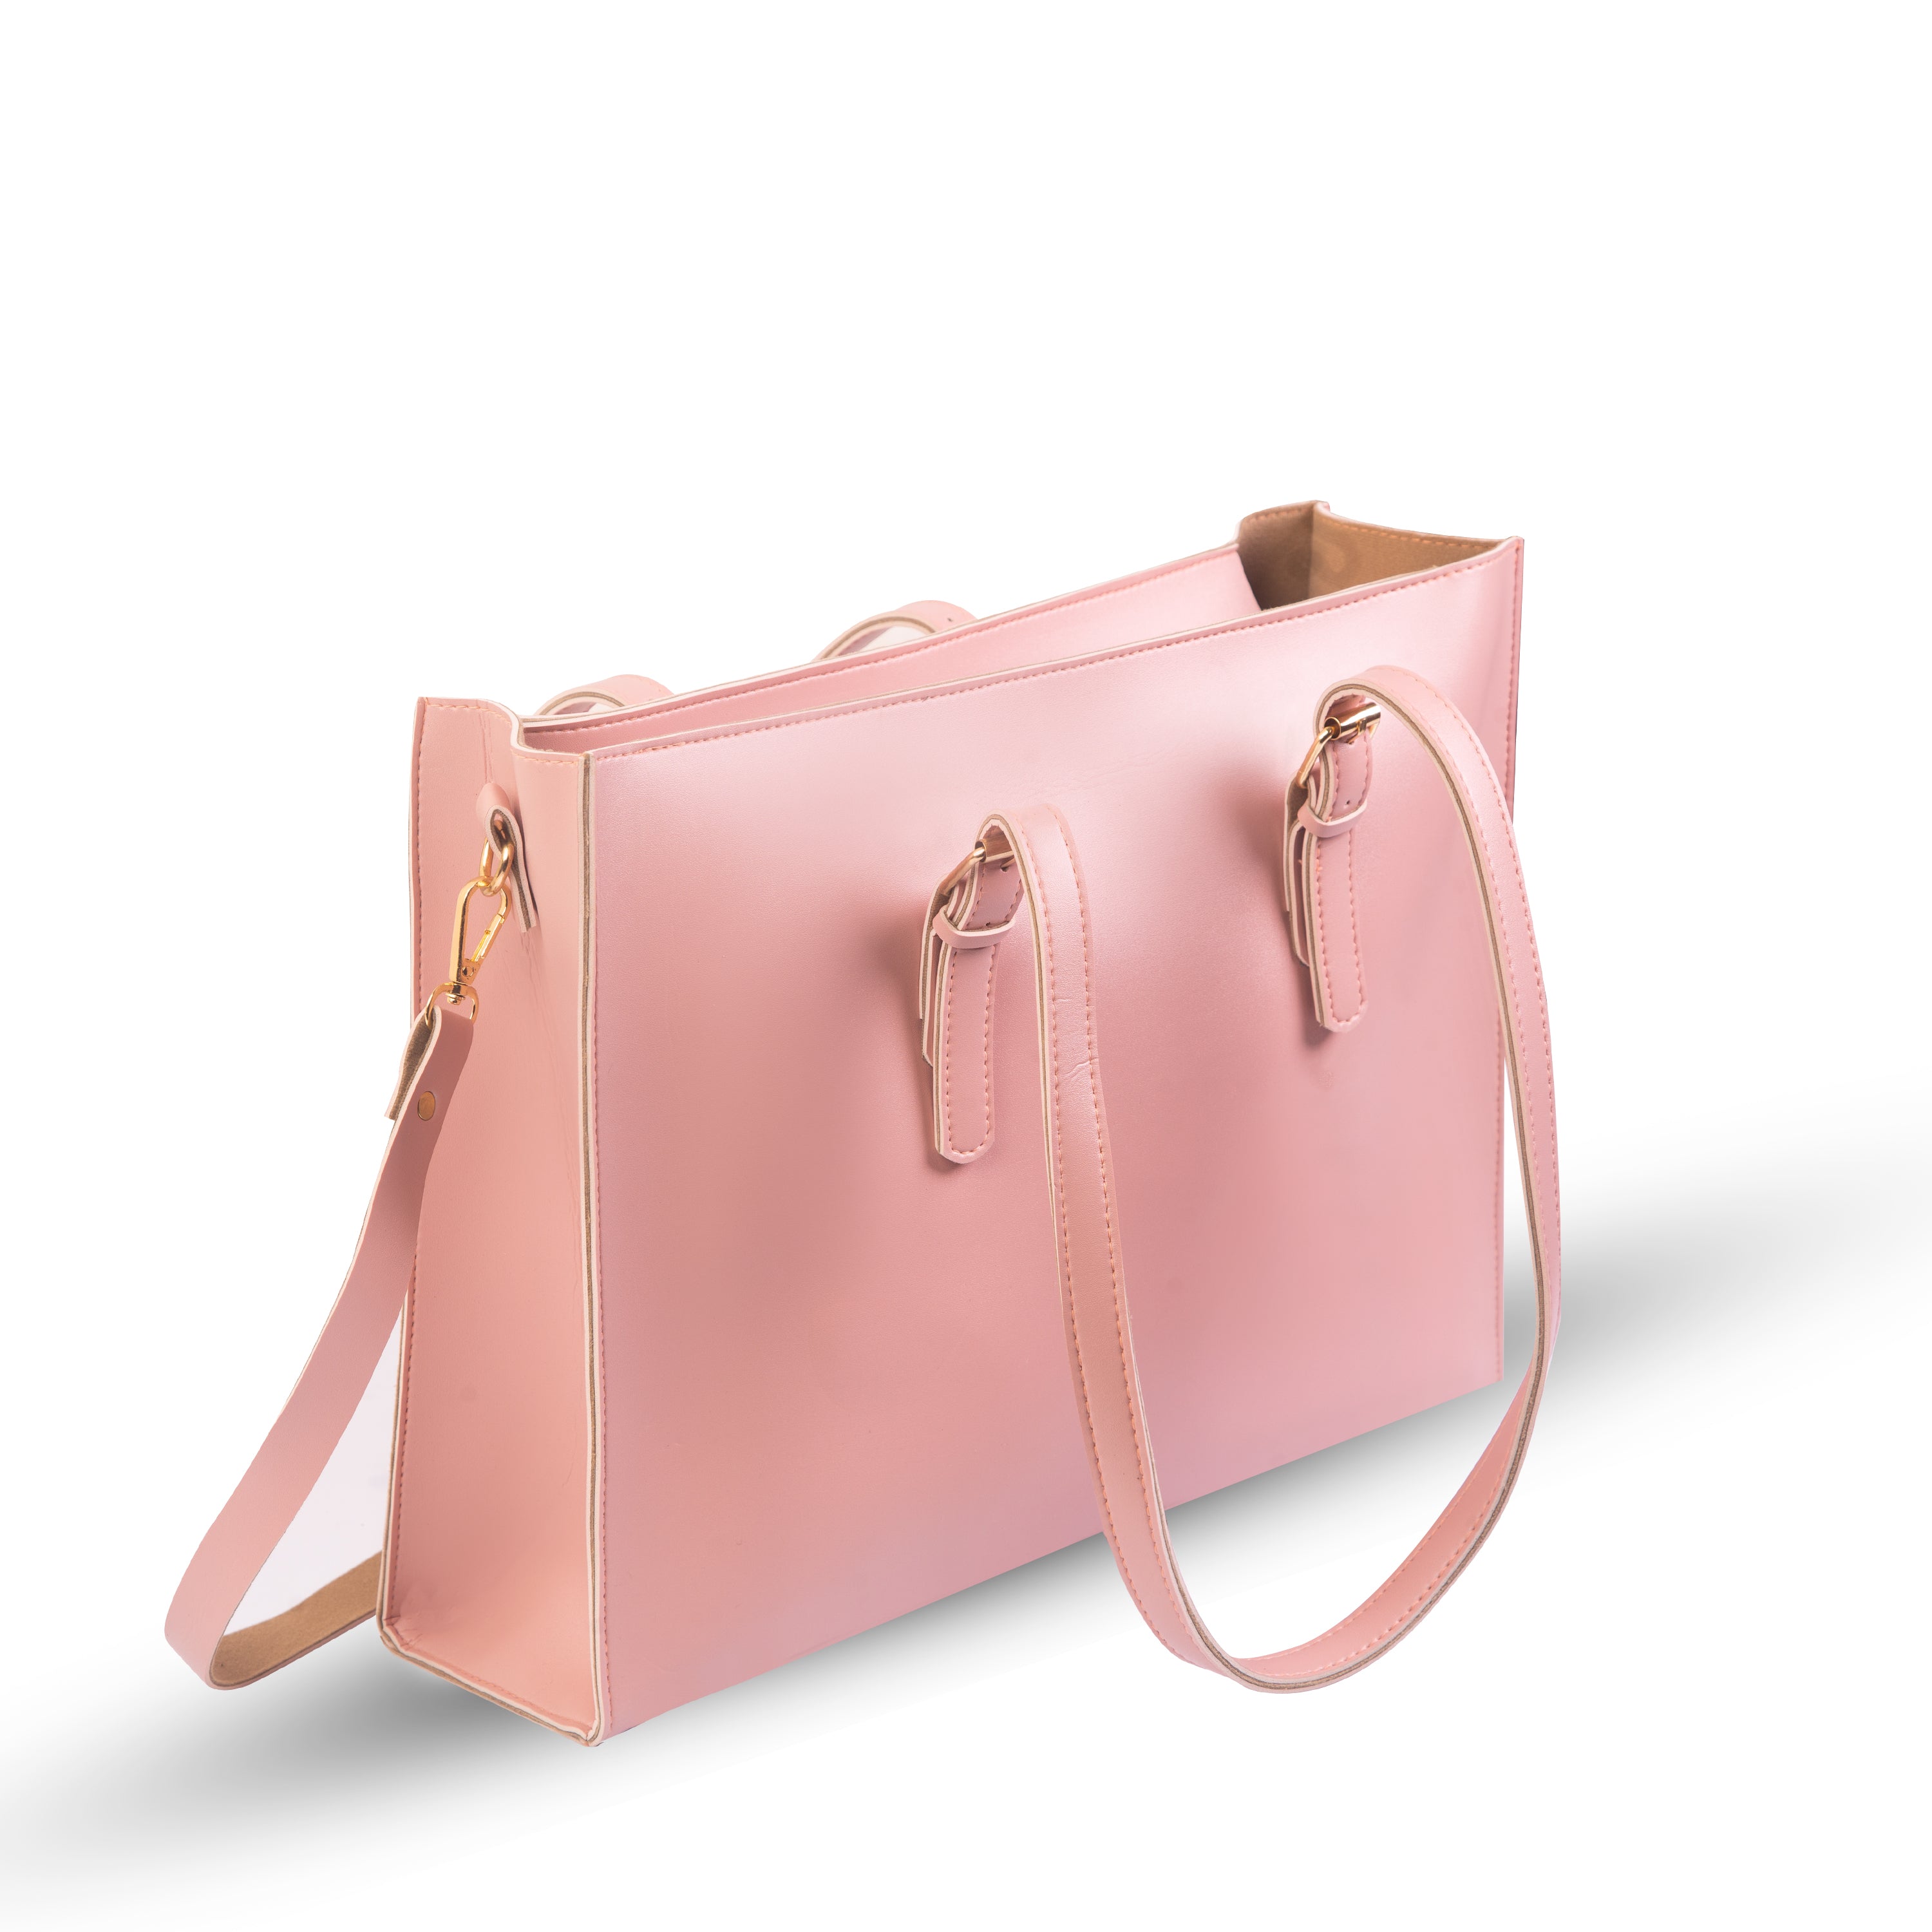 Blossom Pink tote bag